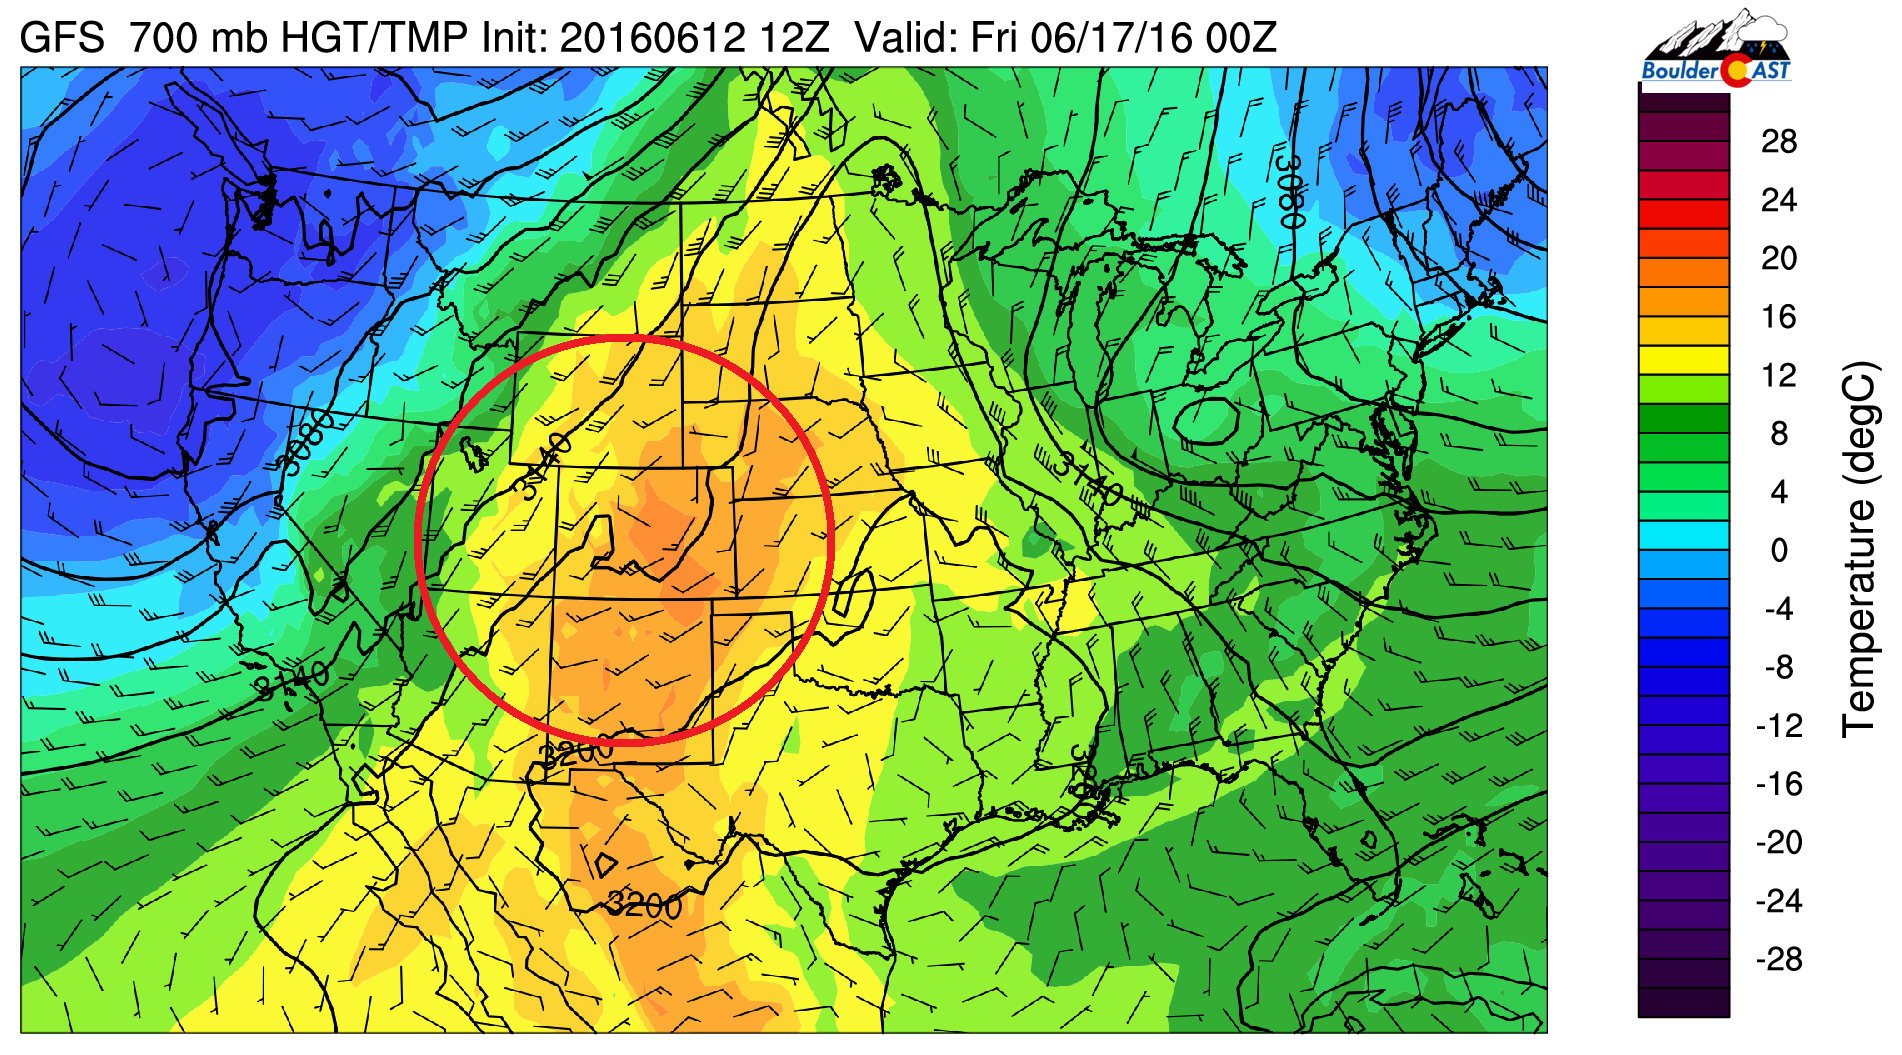 GFS 700 mb temperature for Thursday, showing temperatures near 17 degC, supporting middle 90's over the Plains 